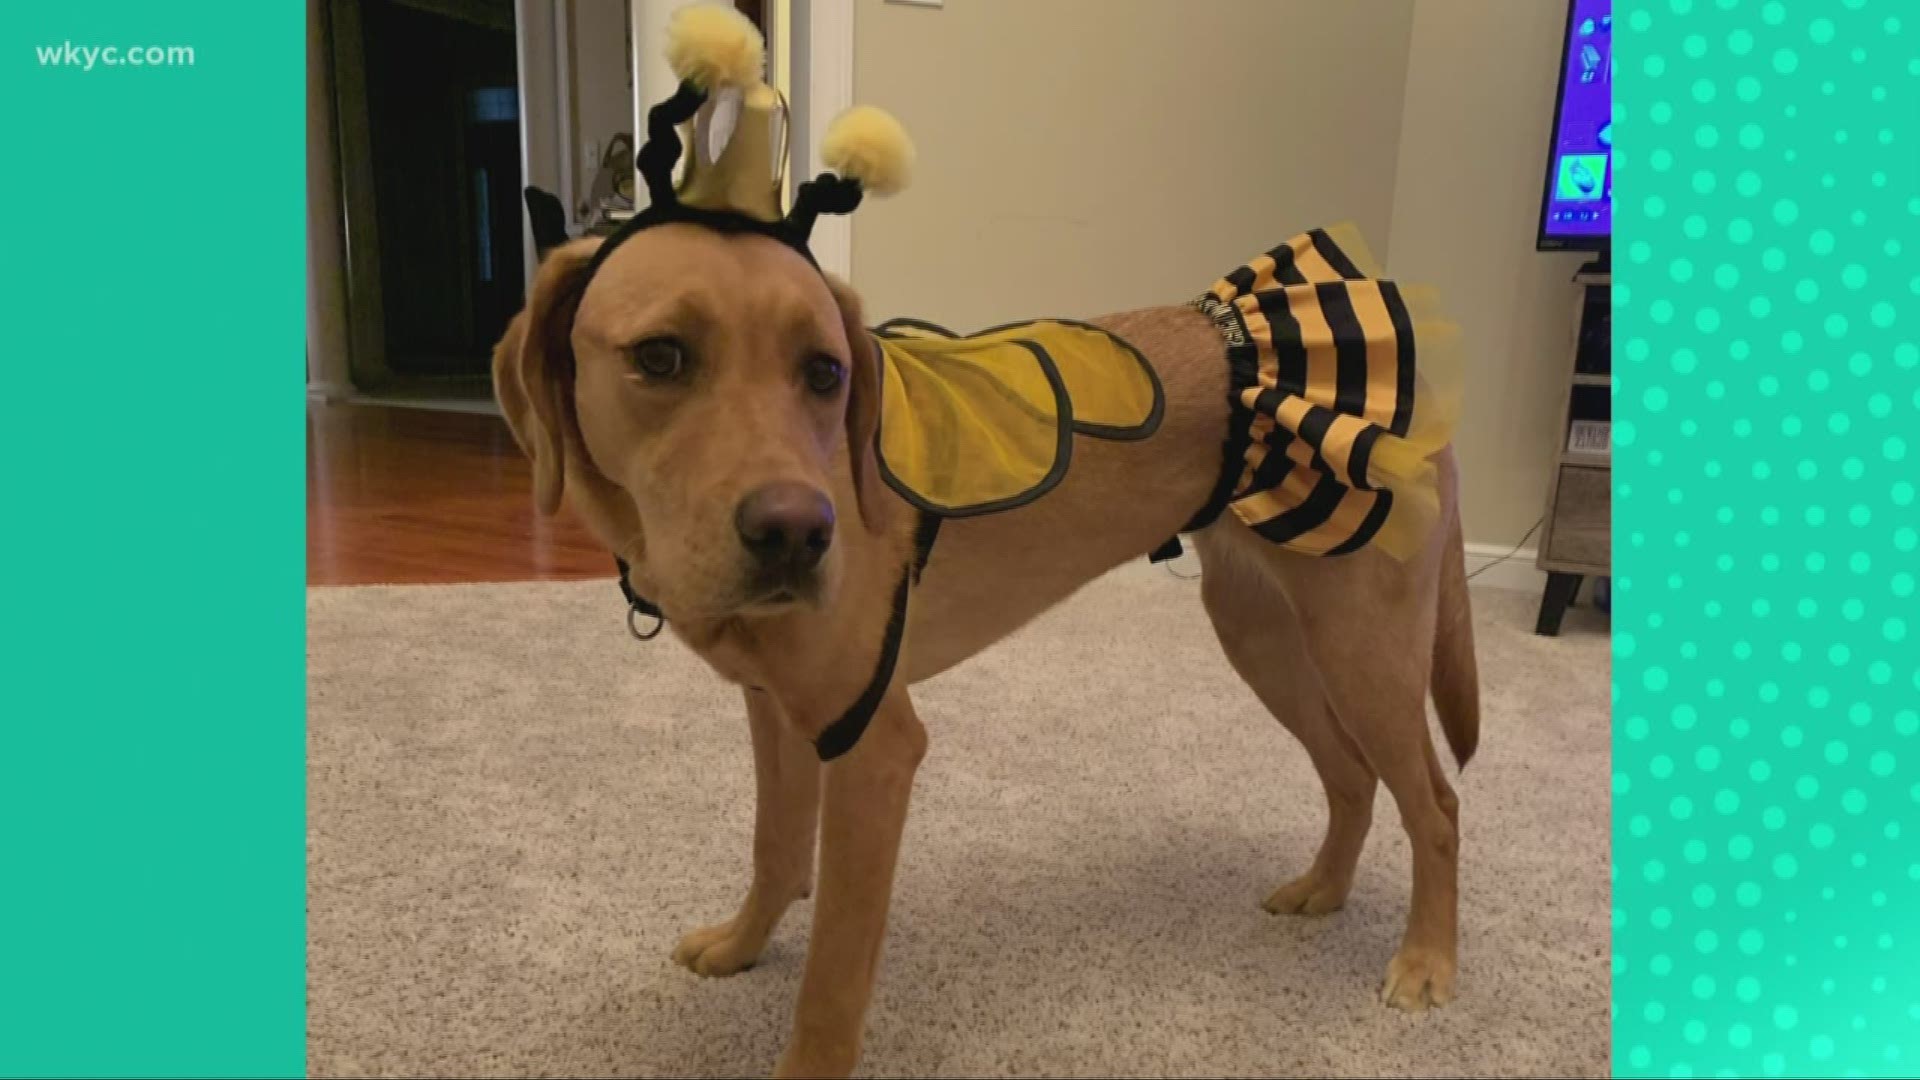 Roxy, our Wags 4 Warriors pup, dropped by to show off her Halloween costume. Plus, we learned some safety tips for your pets during trick-or-treat night.